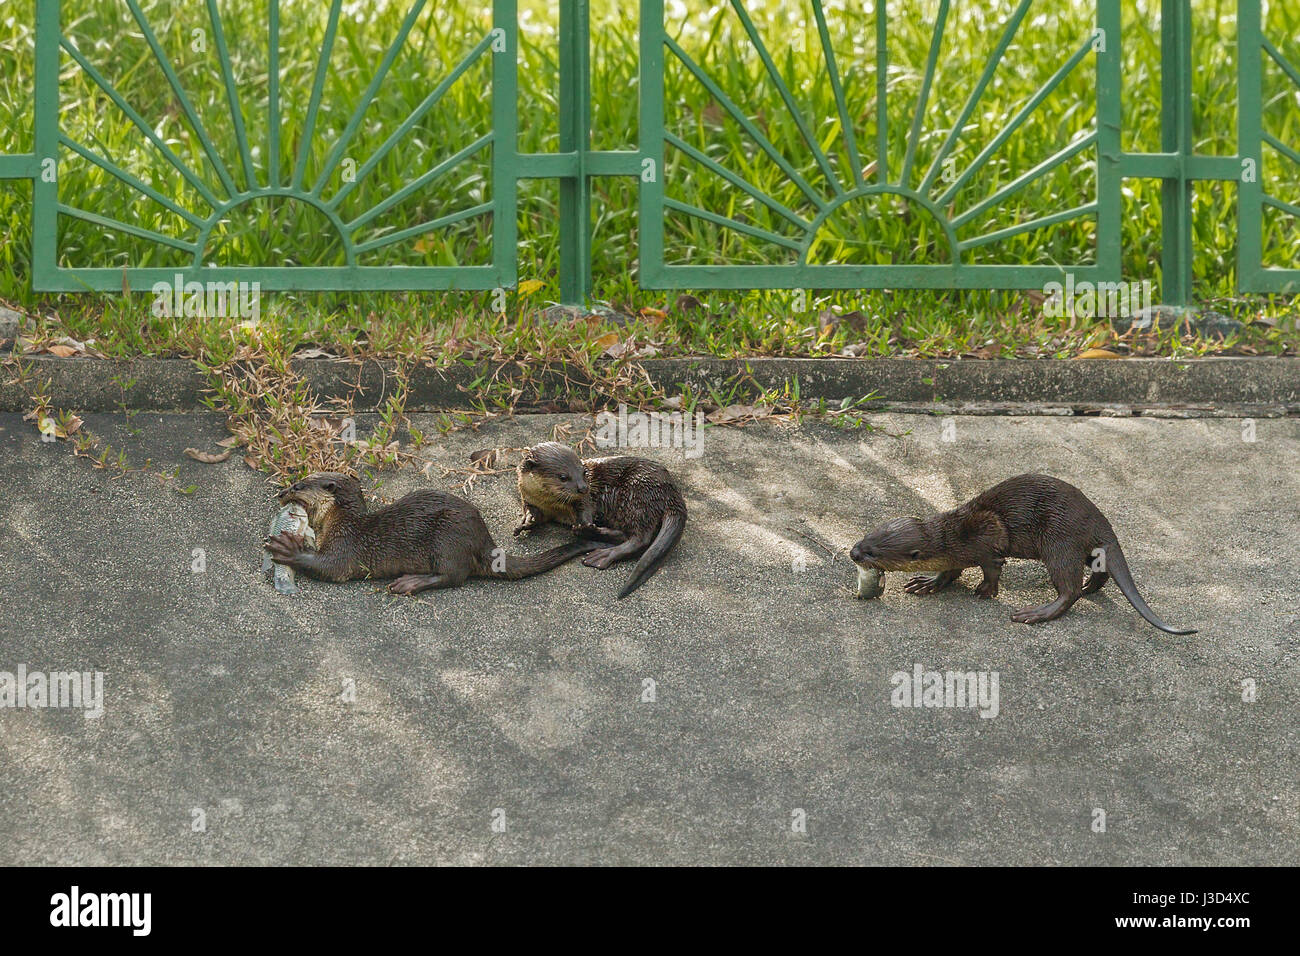 Smooth-coated otter (Lutrogale perspicillata) cubs eats fish caught by their parents on a concrete river bank, Singapore Stock Photo